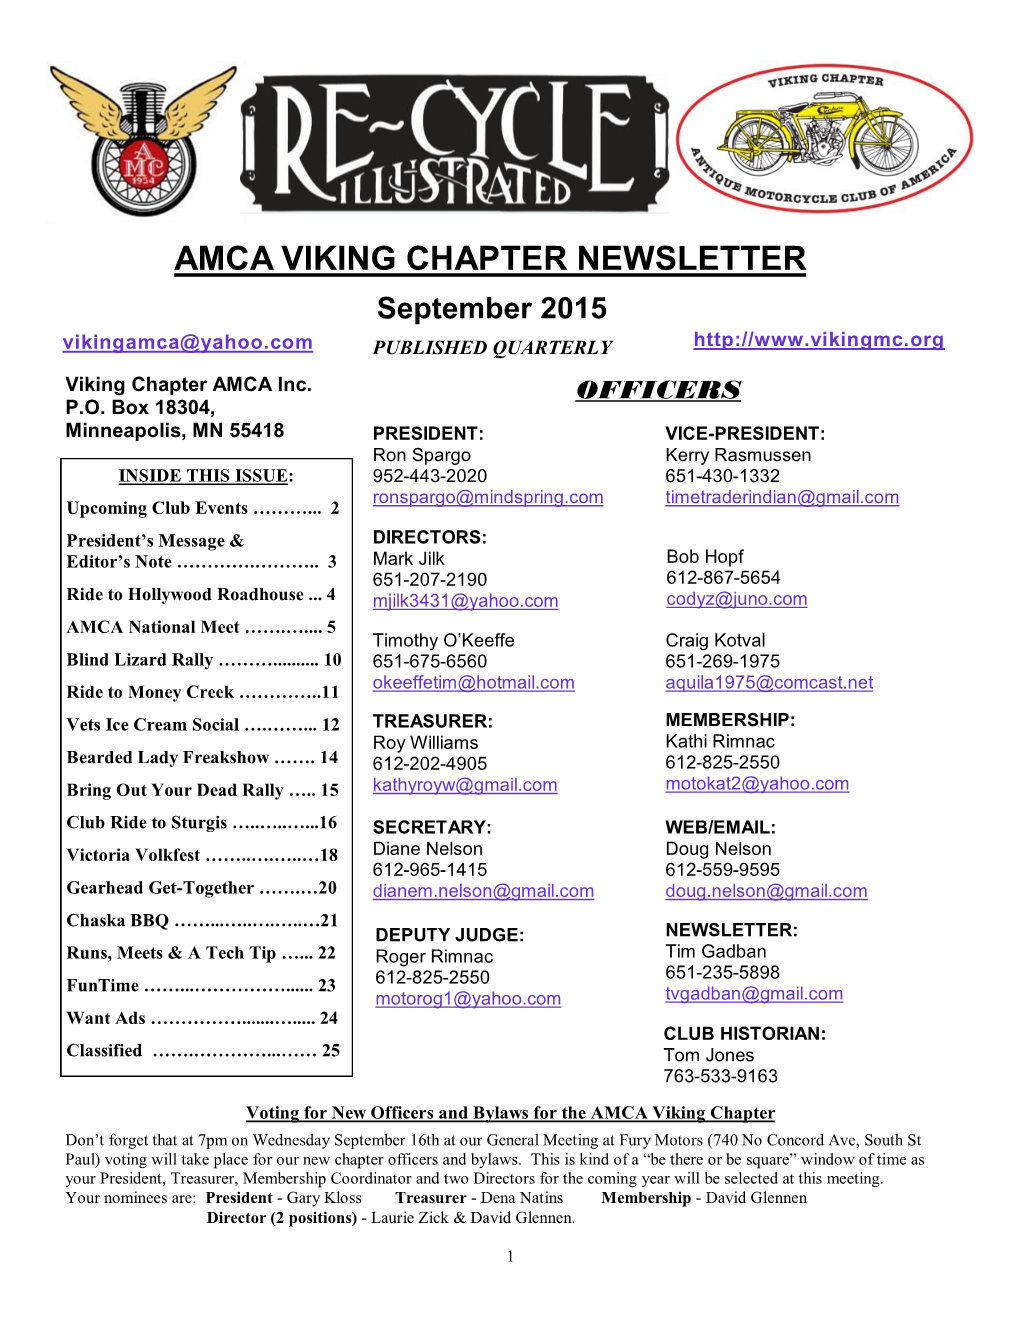 Re-Cycle September 2015